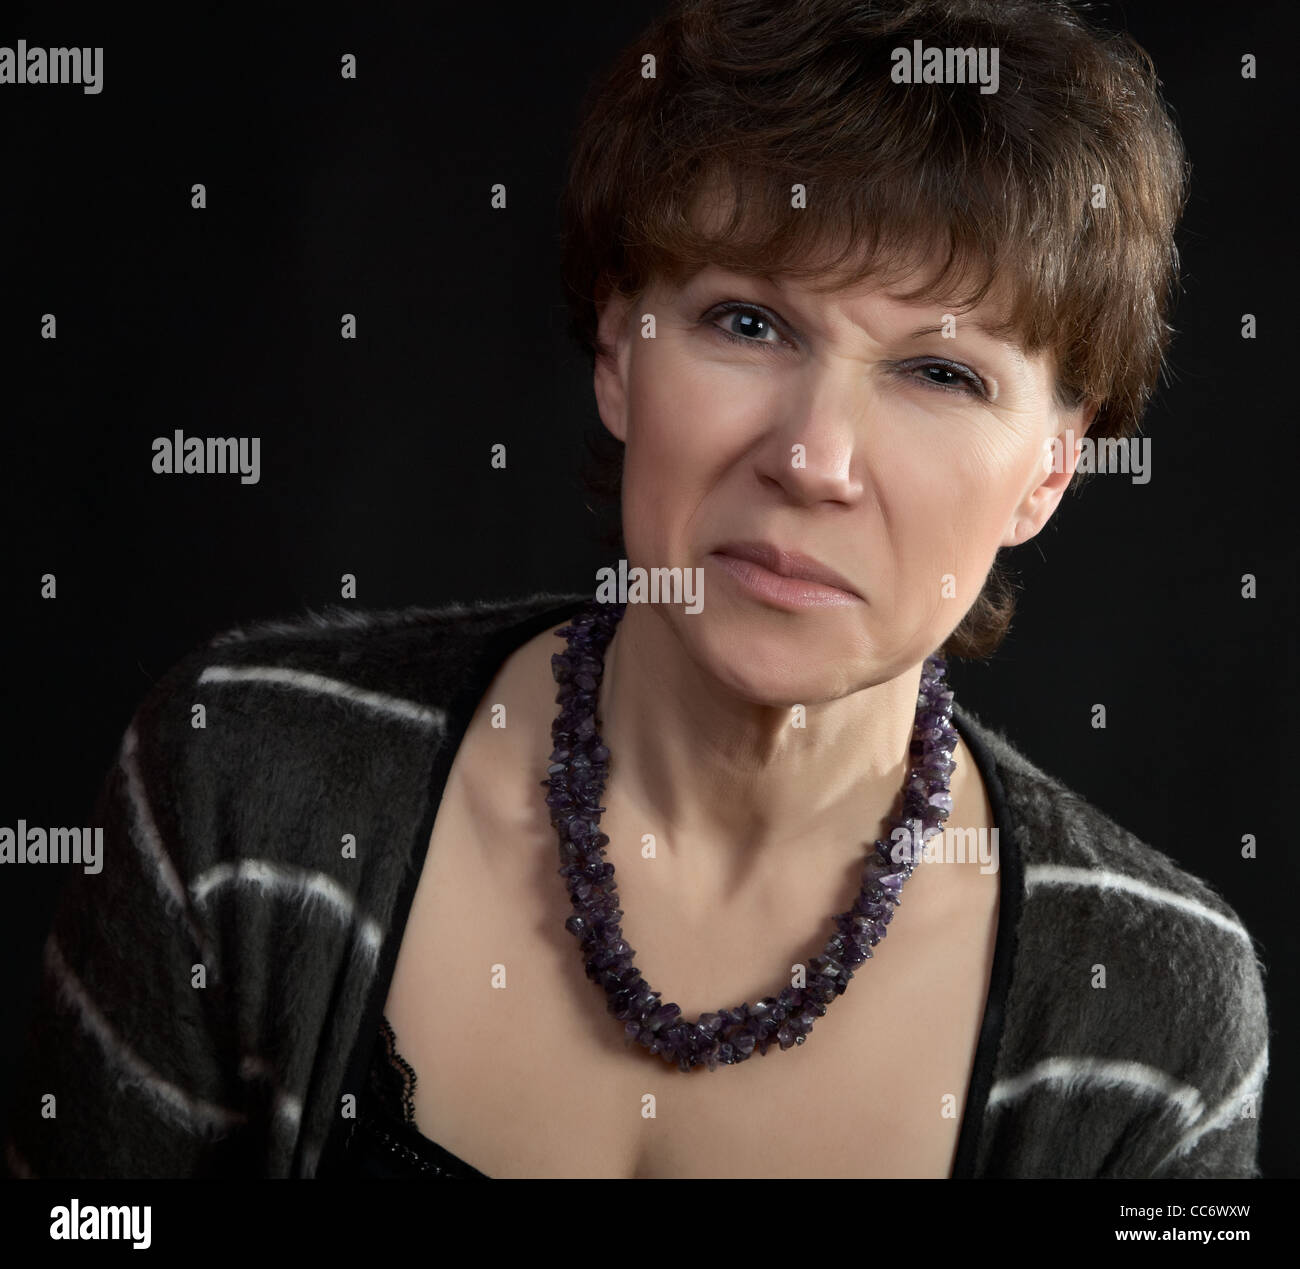 The woman with discontent grimace on a black background Stock Photo